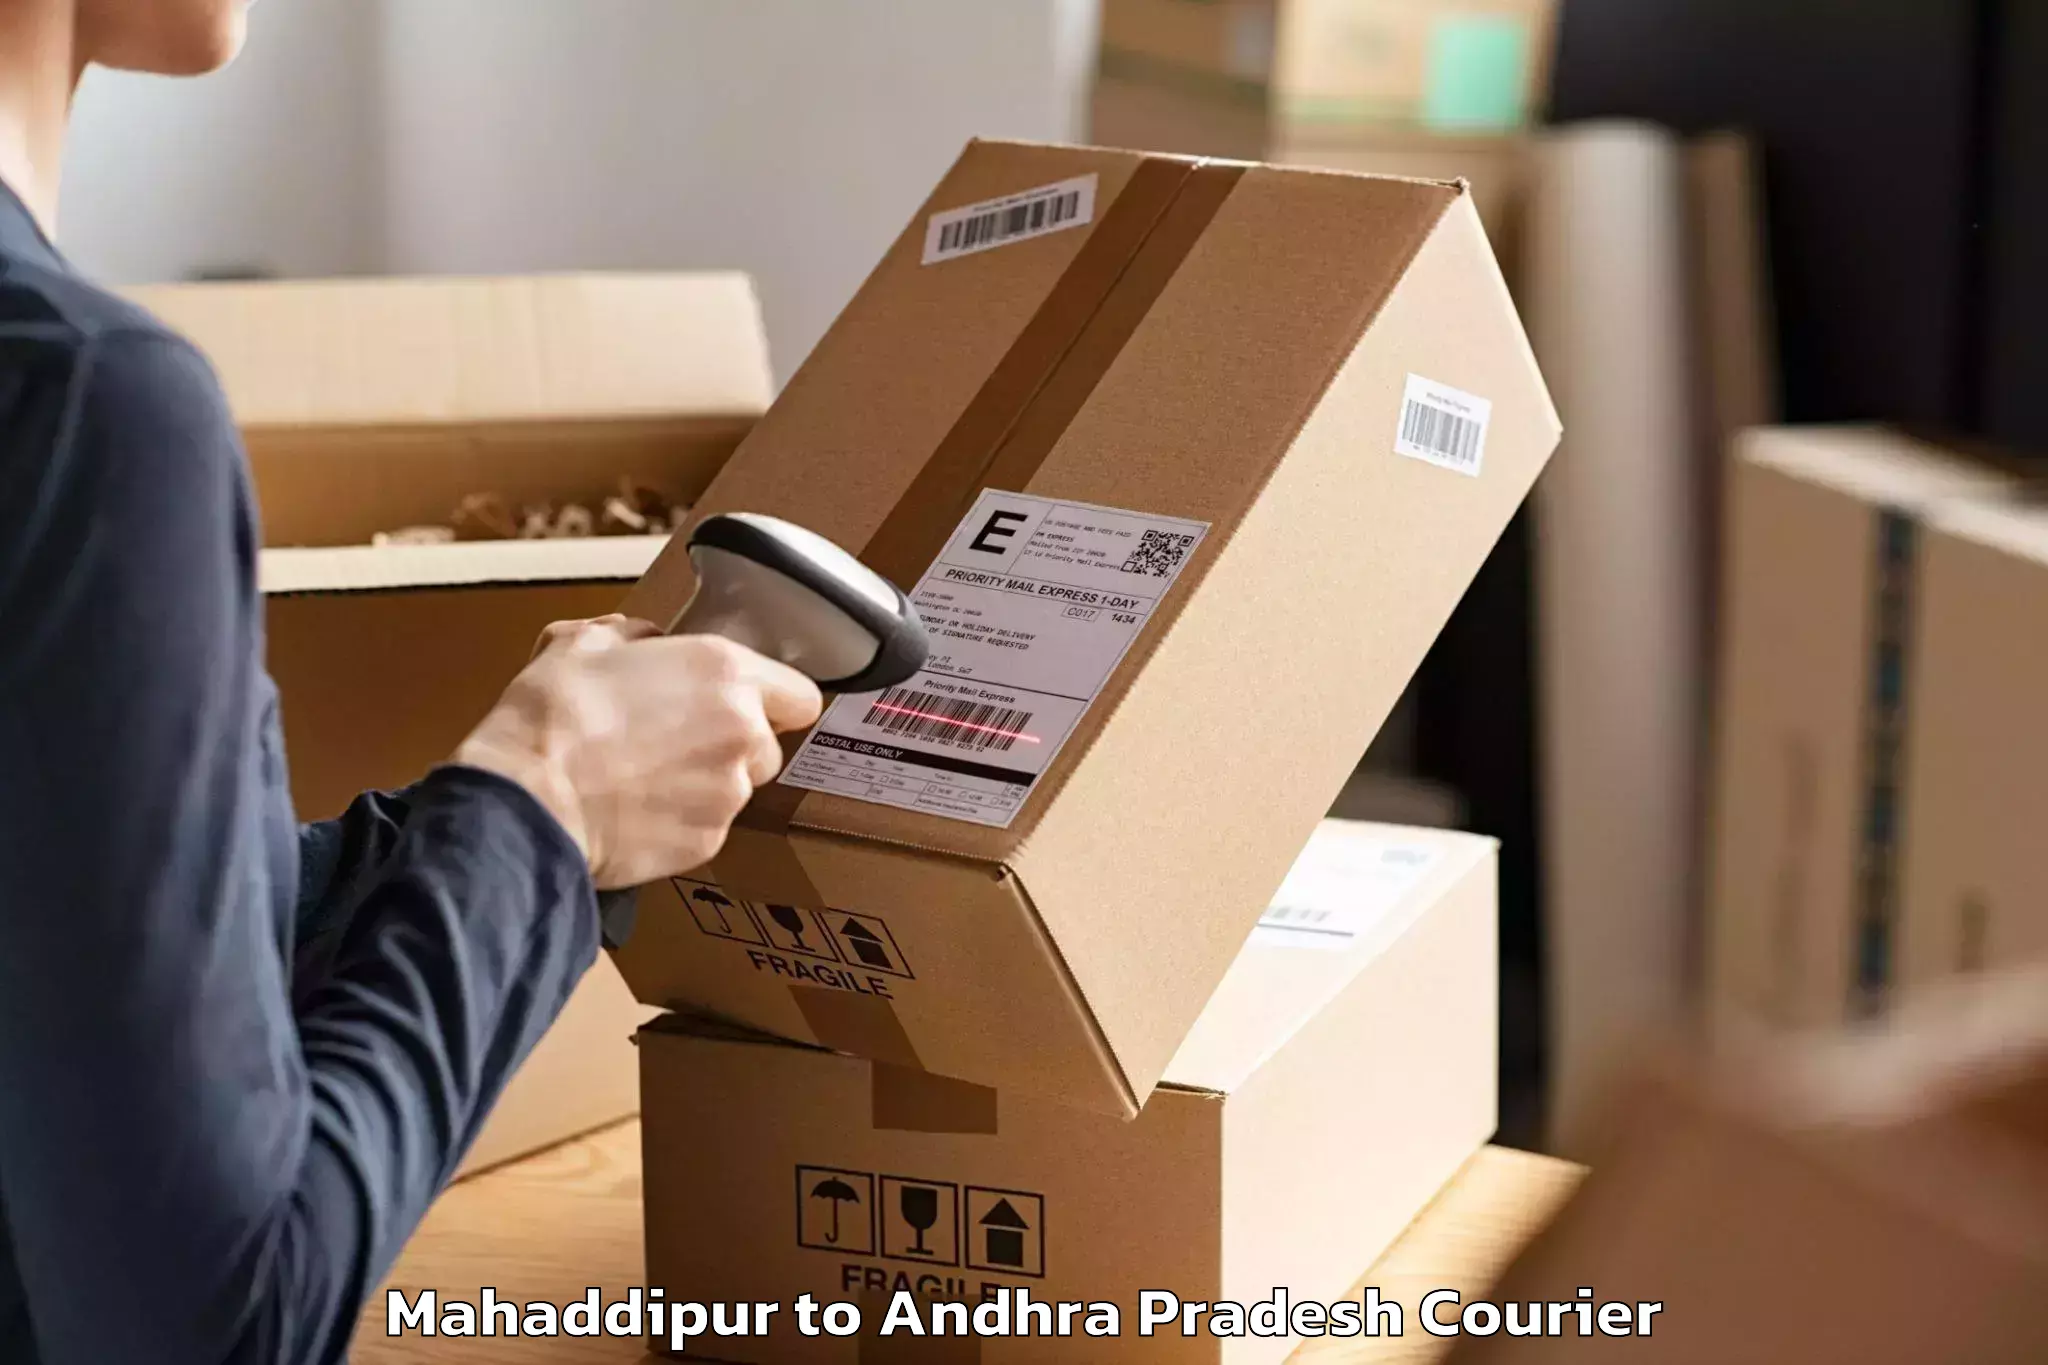 Home moving specialists Mahaddipur to Chimakurthy